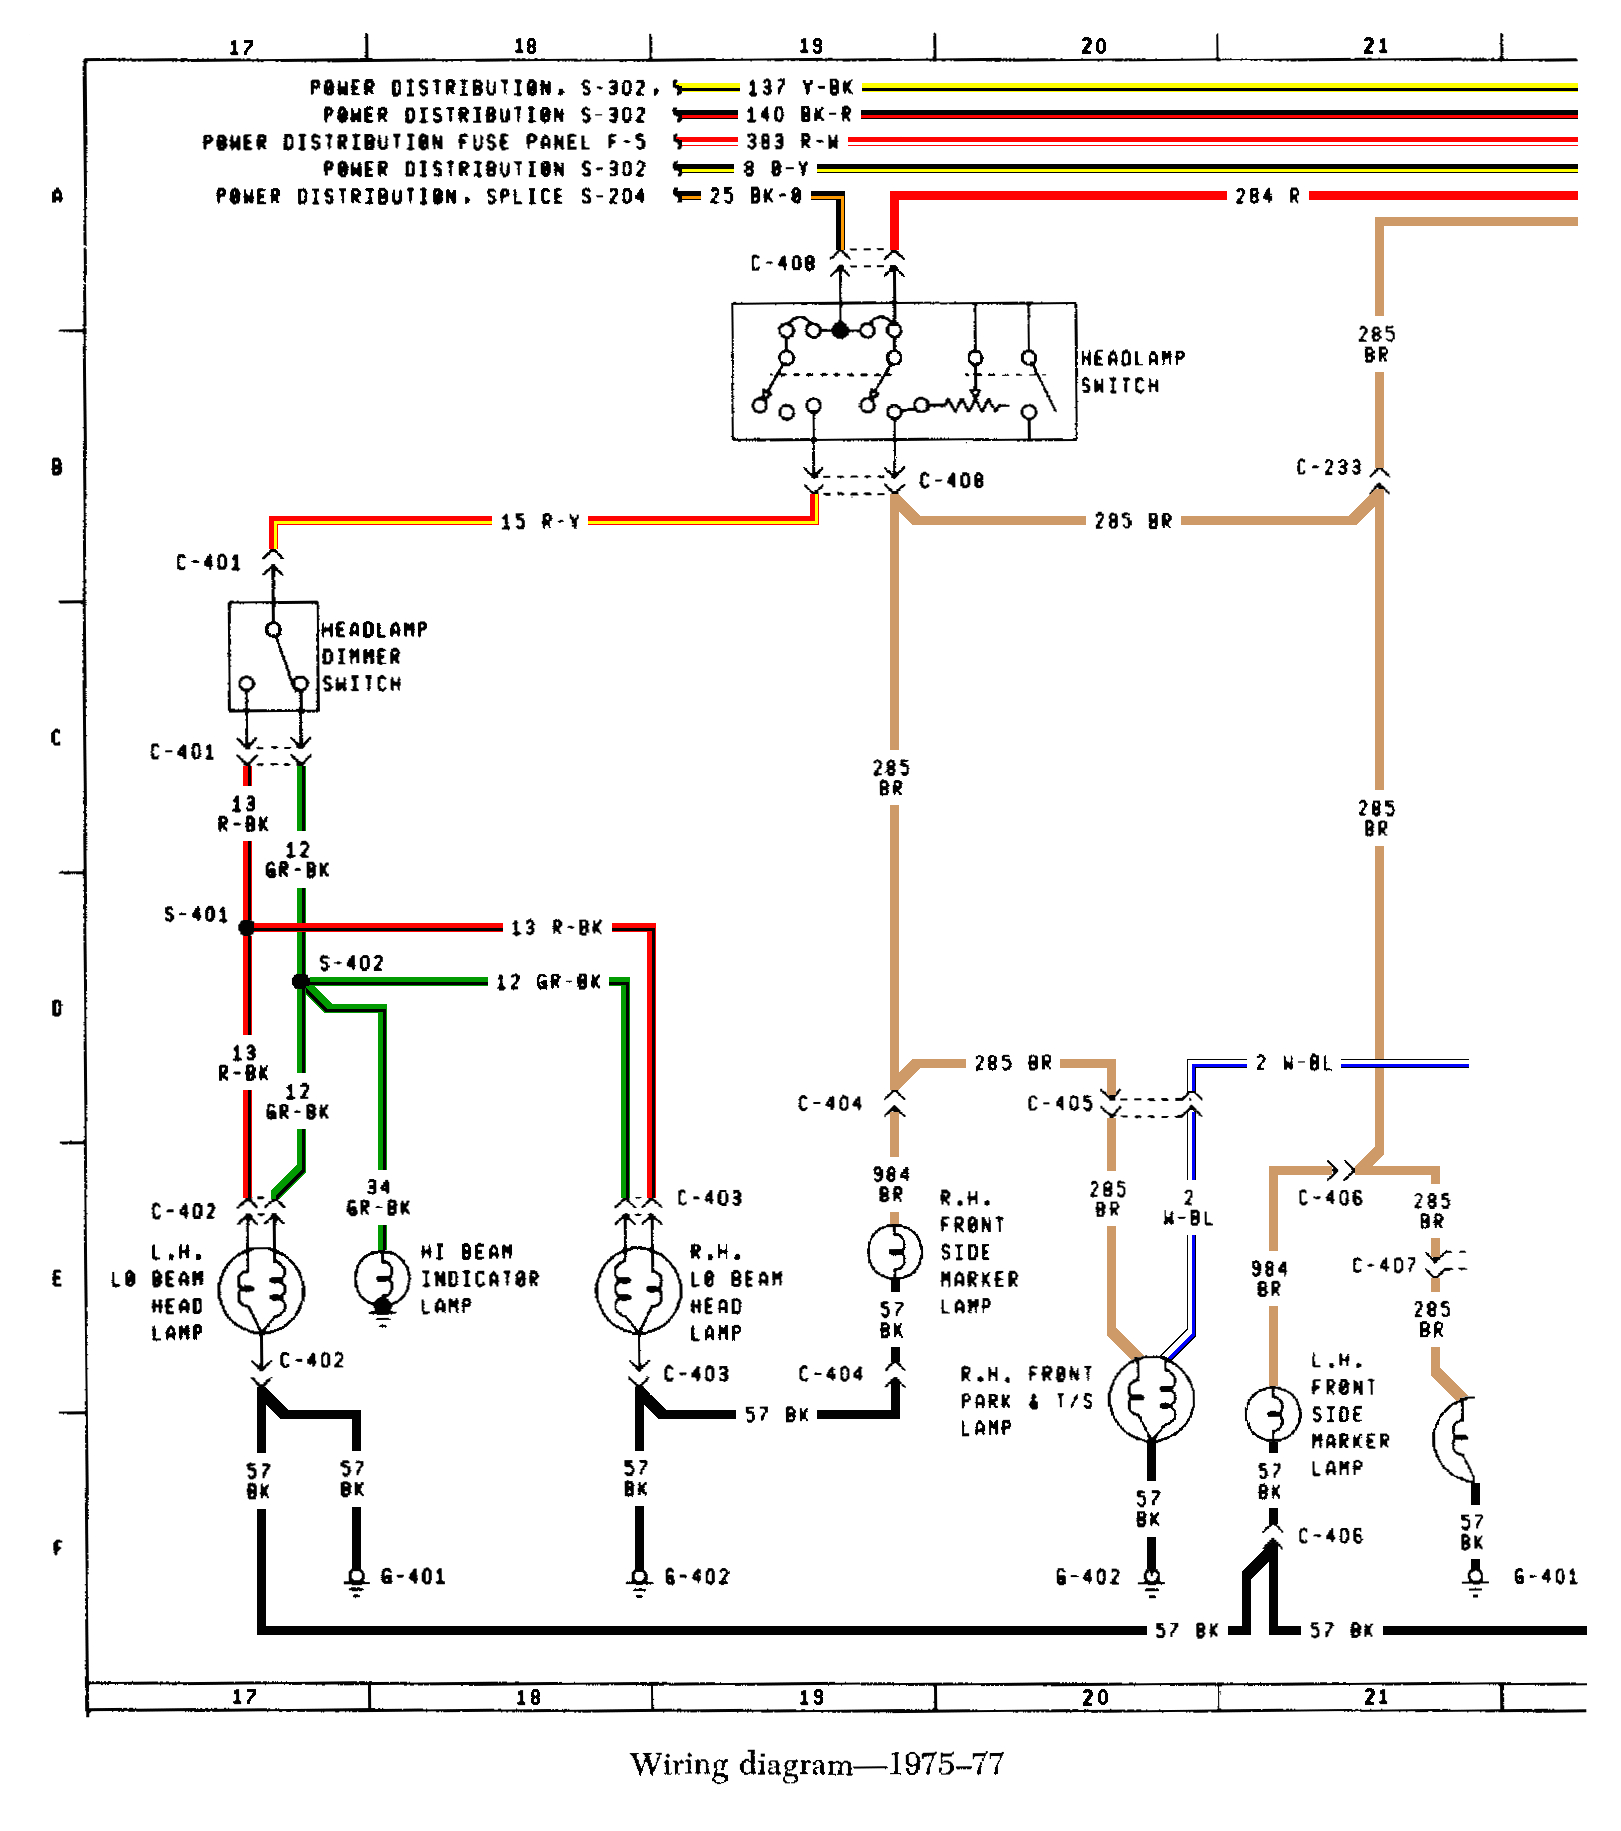 Early Bronco Turn Signal Wiring Diagram Cb20f ford Bronco Wiring Schematic Digital Resources